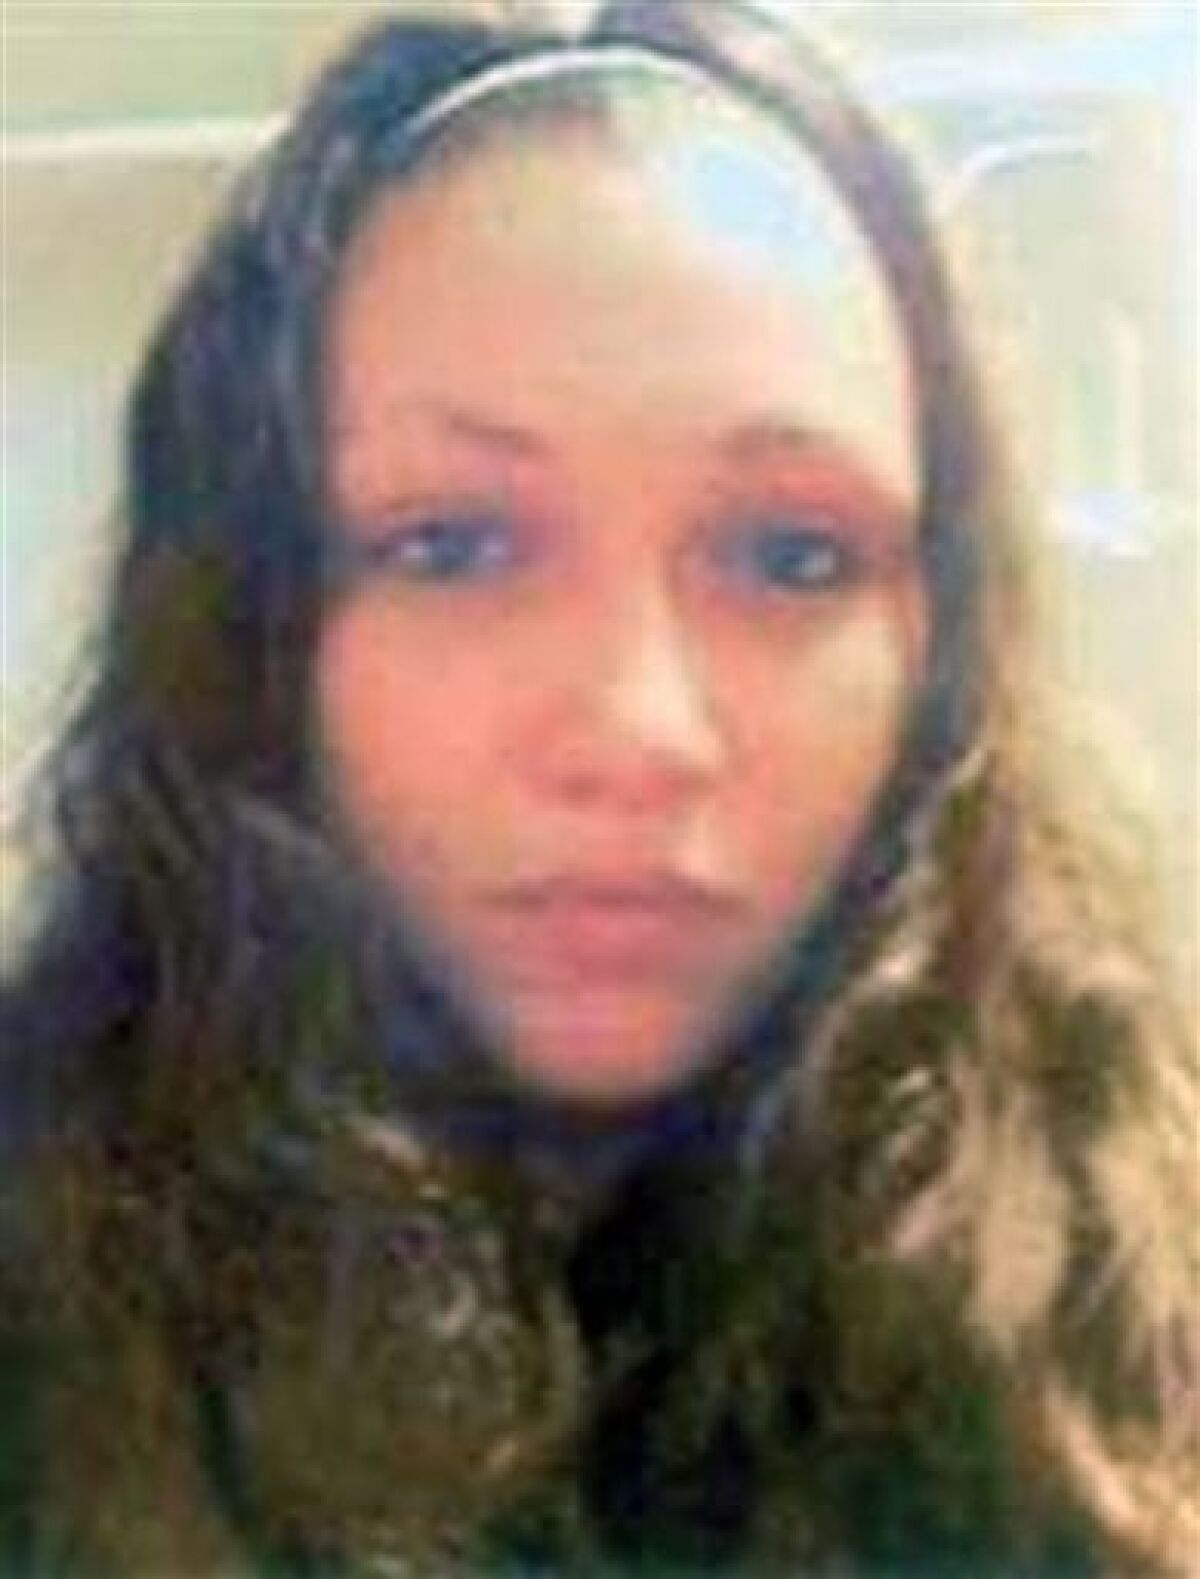 This undated image provided by the FBI shows Ashley Summers. Summers disappeared in 2007 near the house where three missing women were found on Monday, May 6, 2013, near downtown Cleveland. The FBI did not immediately return a call about the case and whether it was connected to that of the three missing women. (AP Photo/FBI)